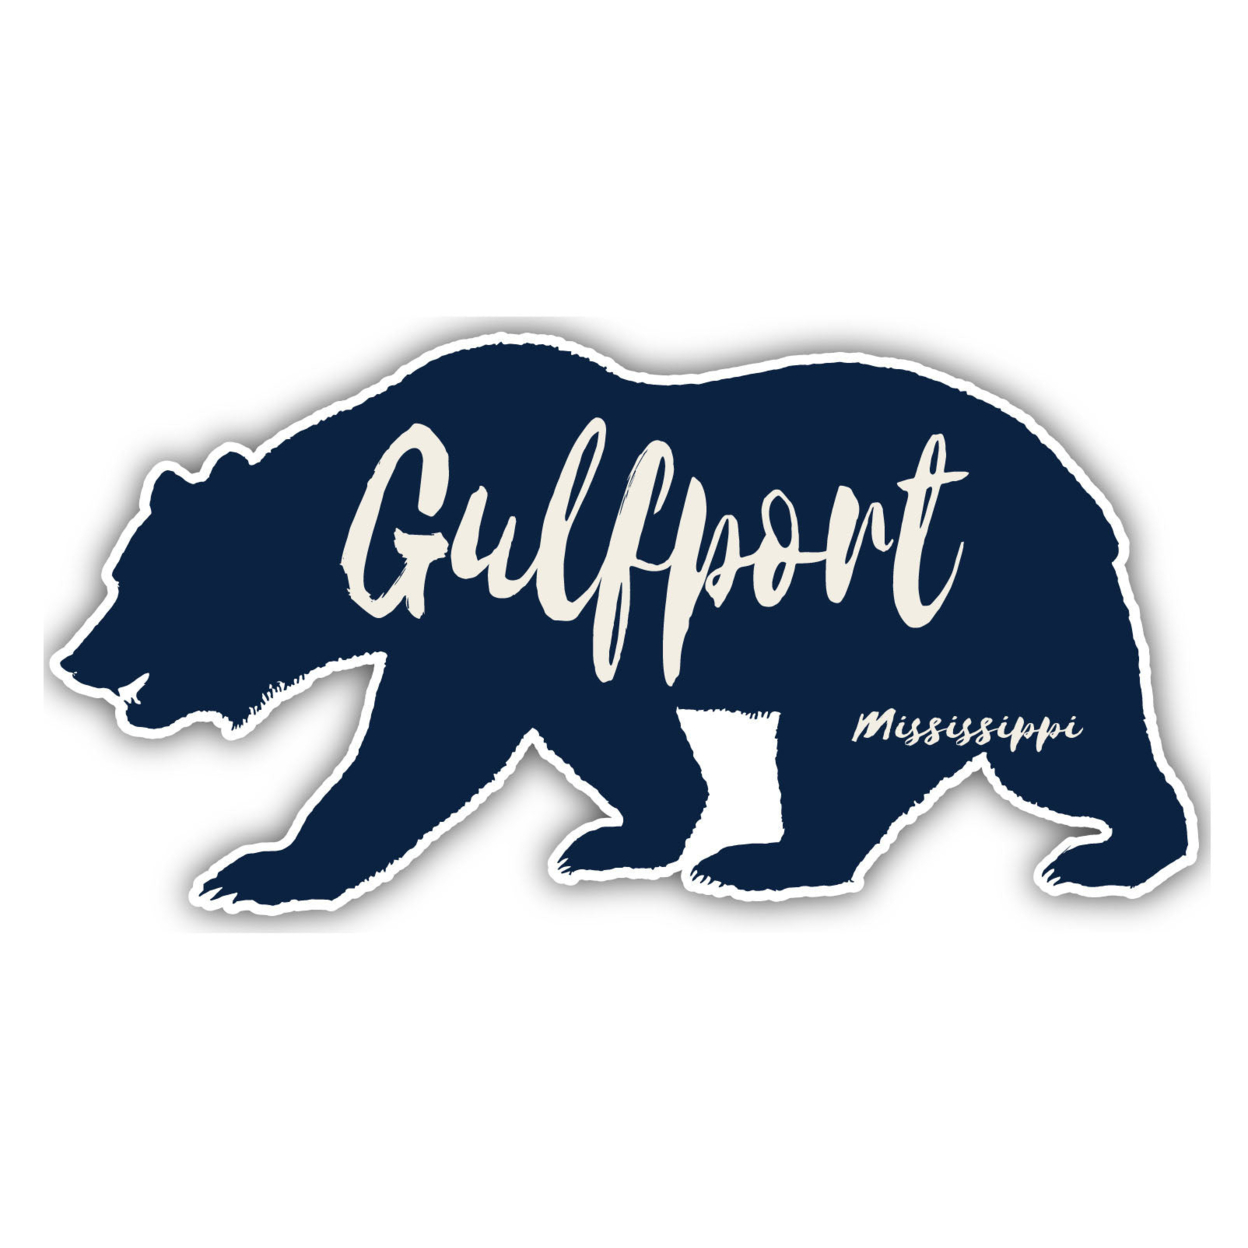 Gulfport Mississippi Souvenir Decorative Stickers (Choose Theme And Size) - Single Unit, 2-Inch, Bear